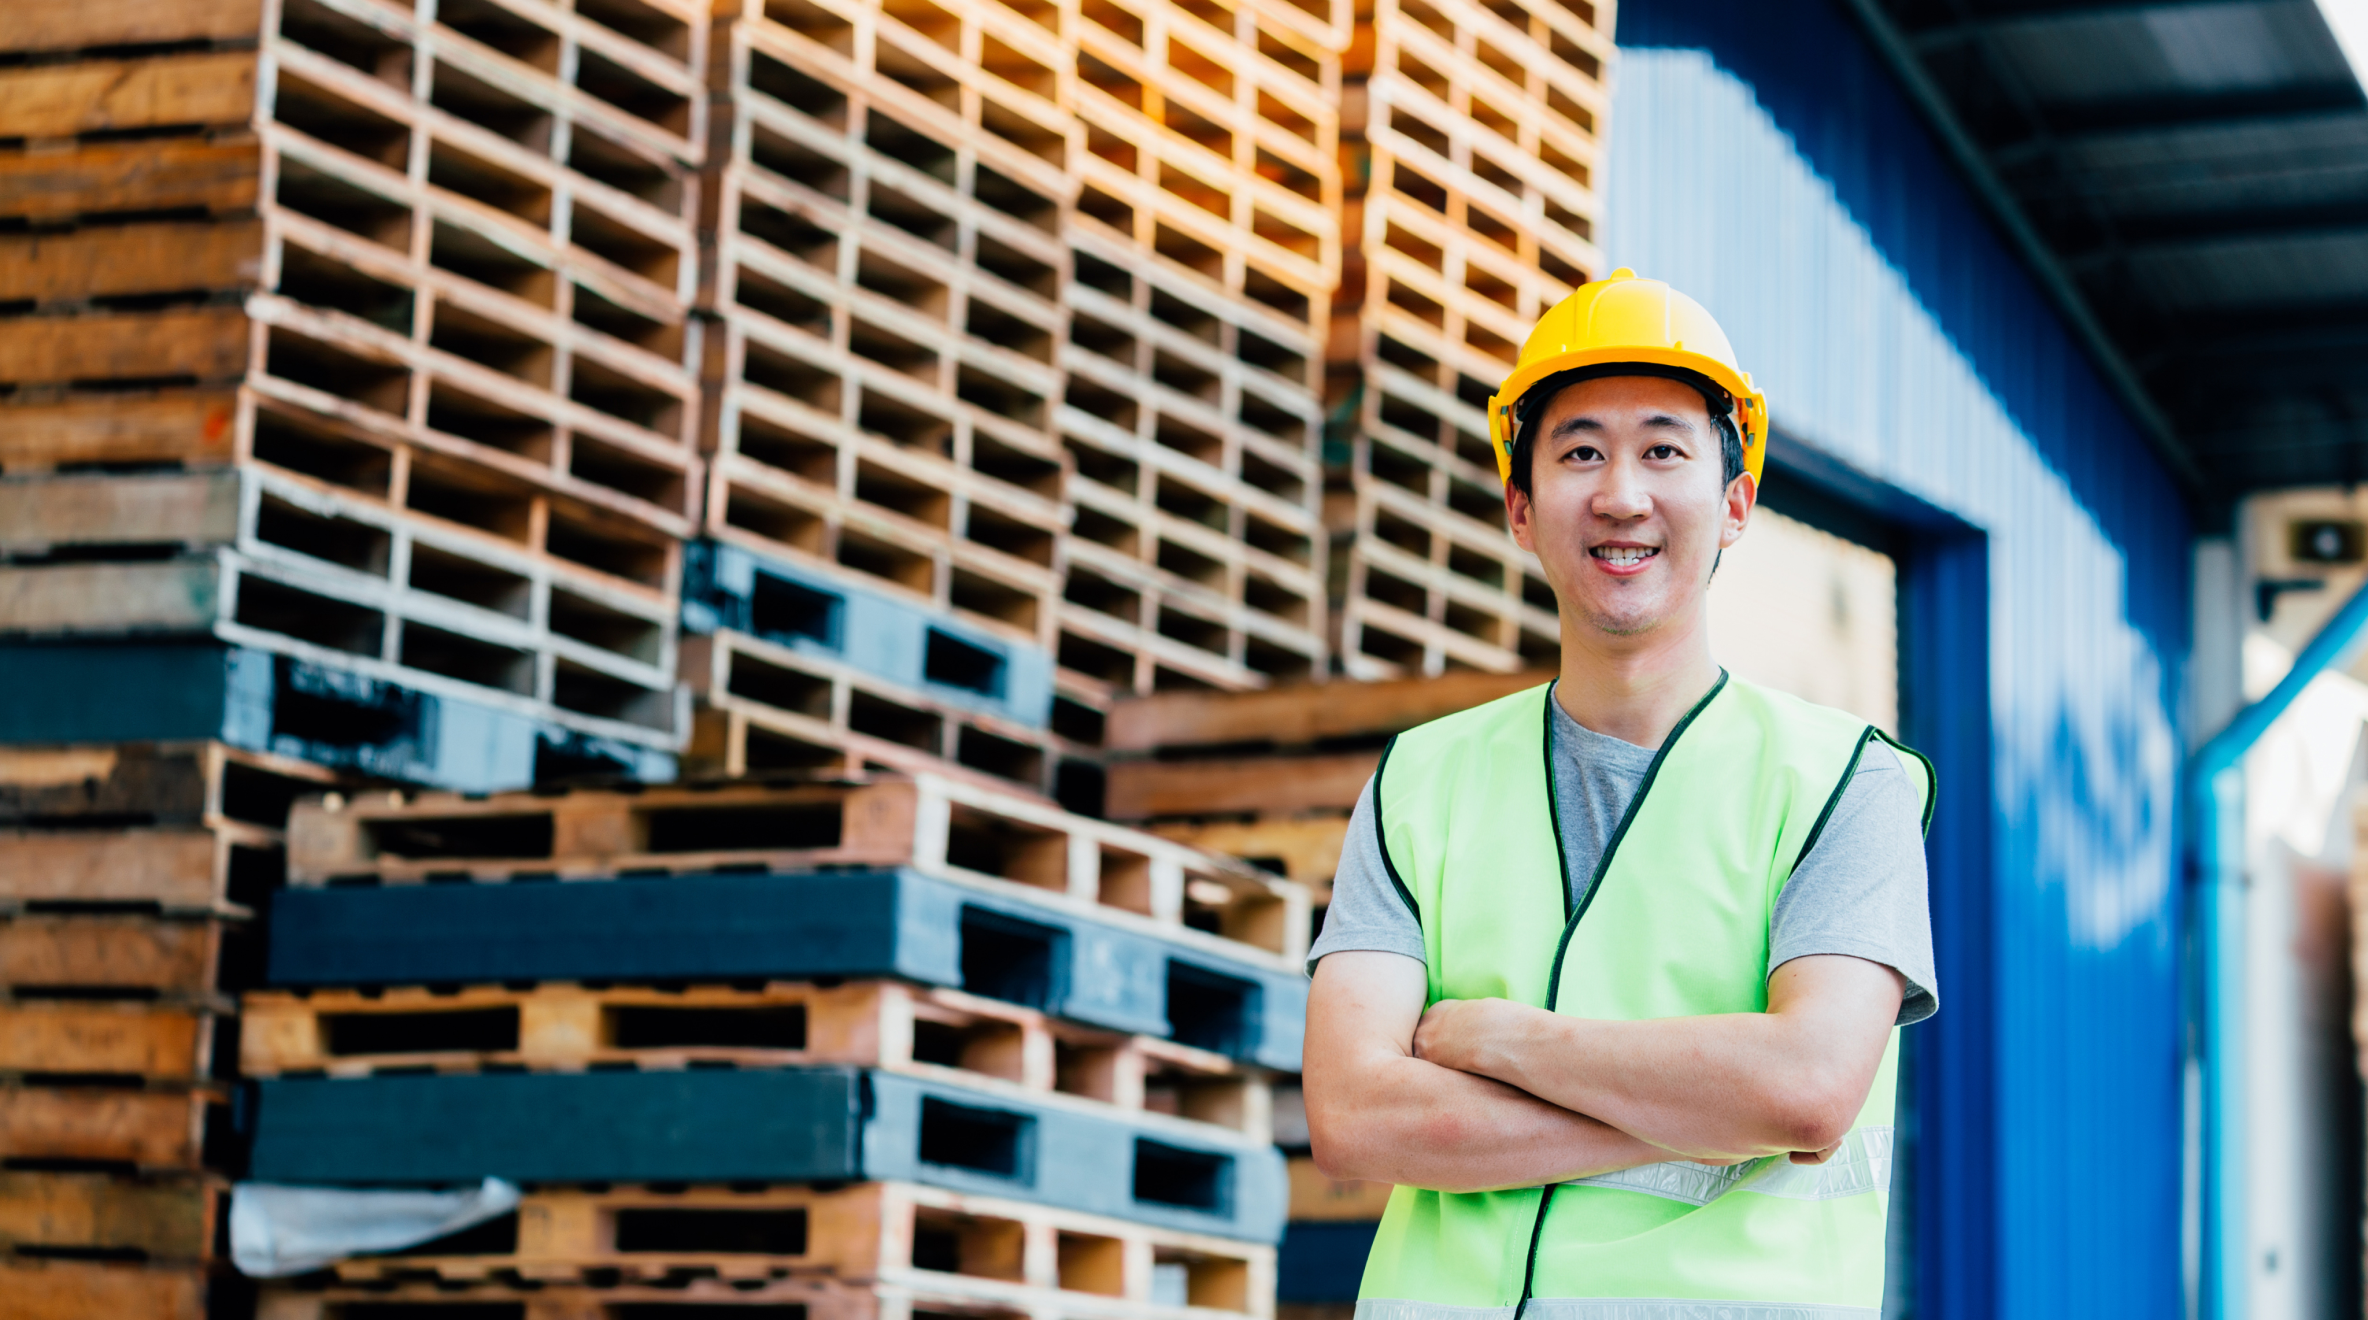  Male wearing a hard hat and vest standing in front of pallets with arms folded